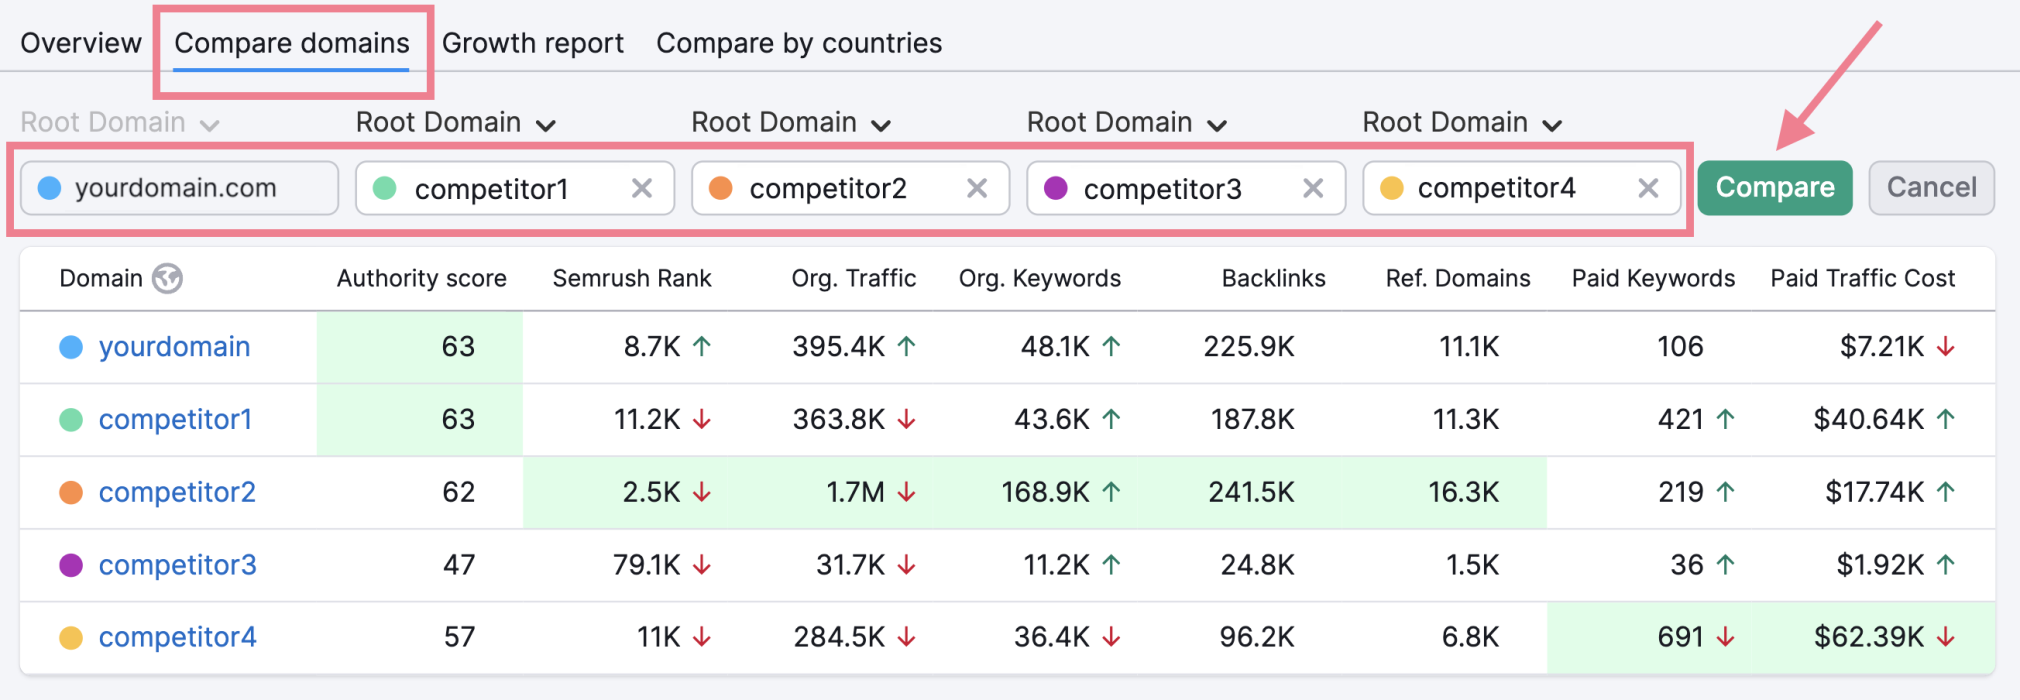 compare competitors with domain overview